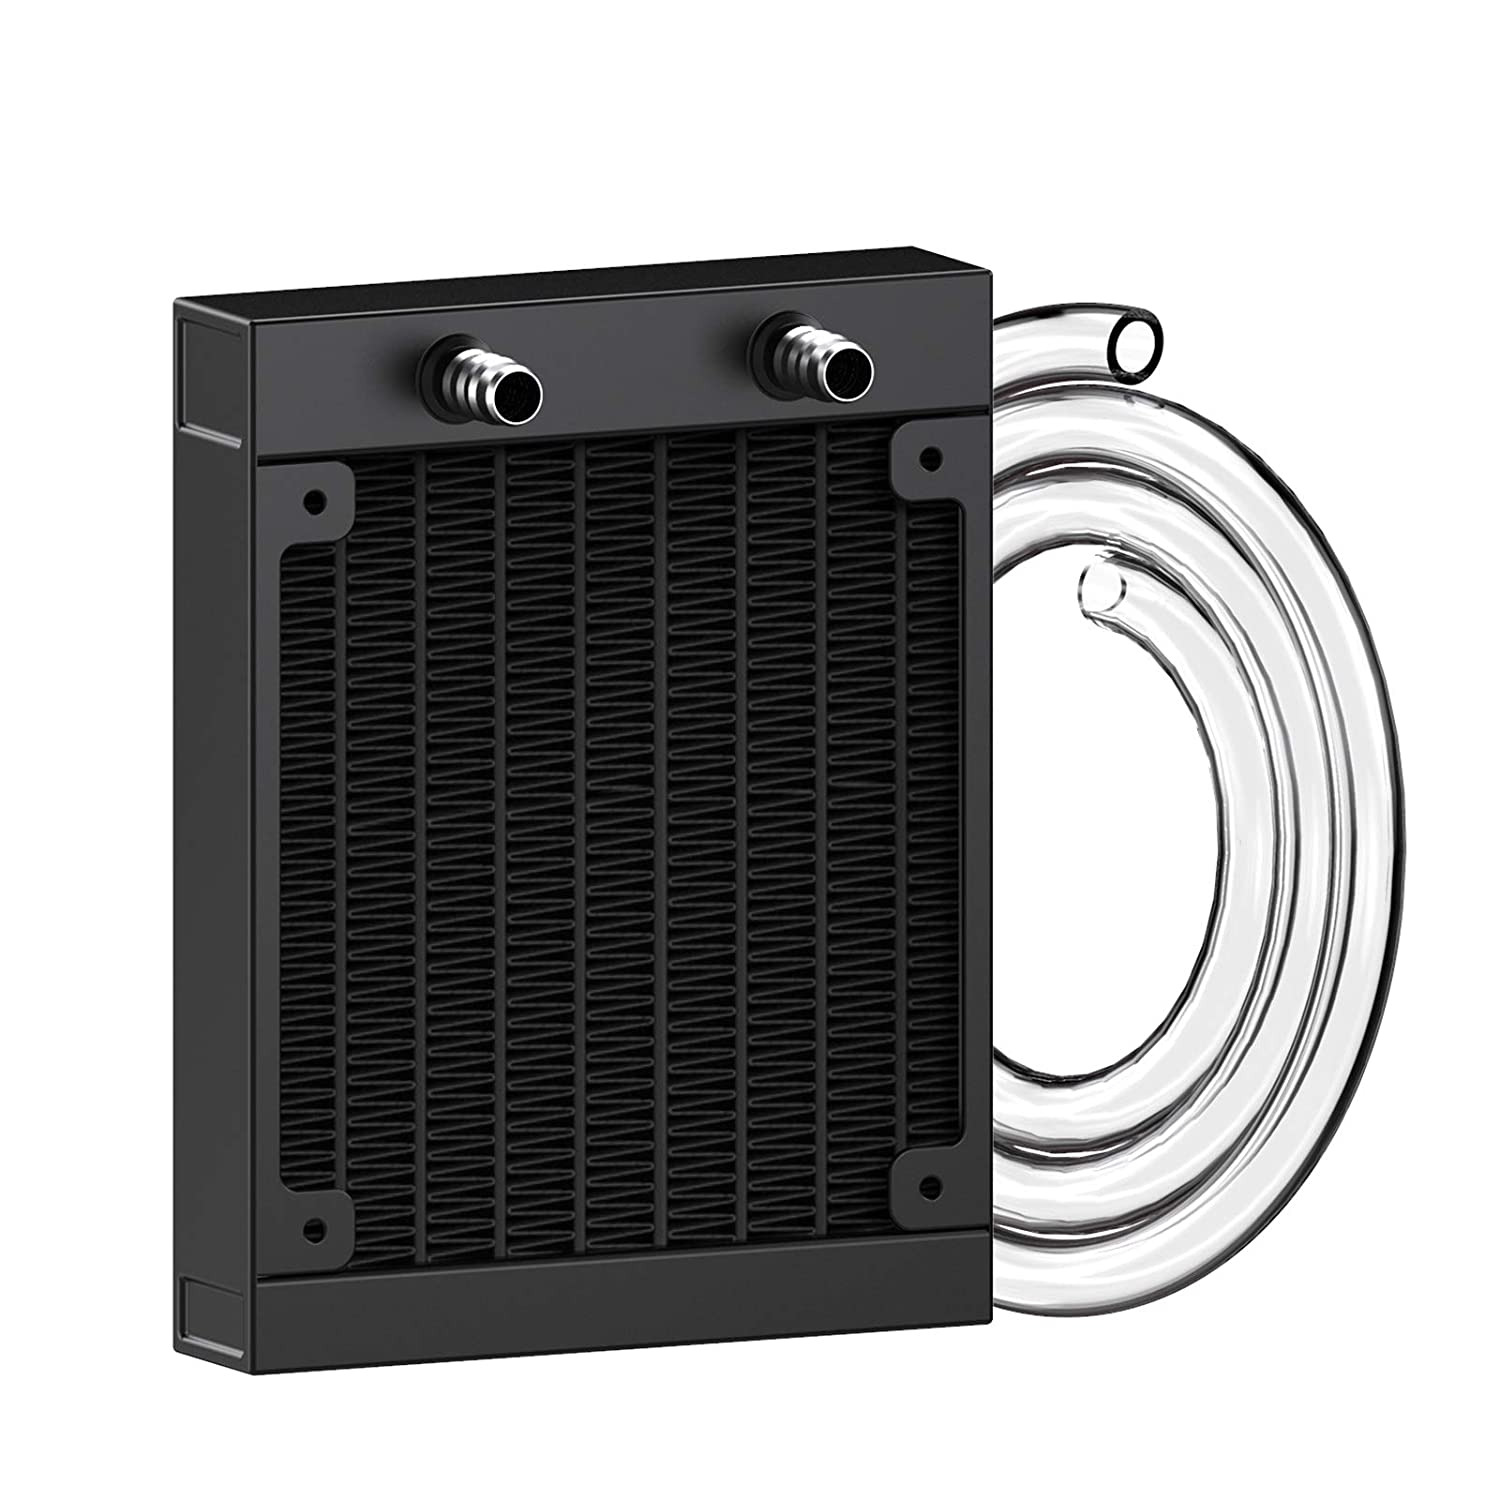 Clyxgs Water Cooling Radiator, 8 Pipe Aluminum Heat Exchanger Radiator with Tube